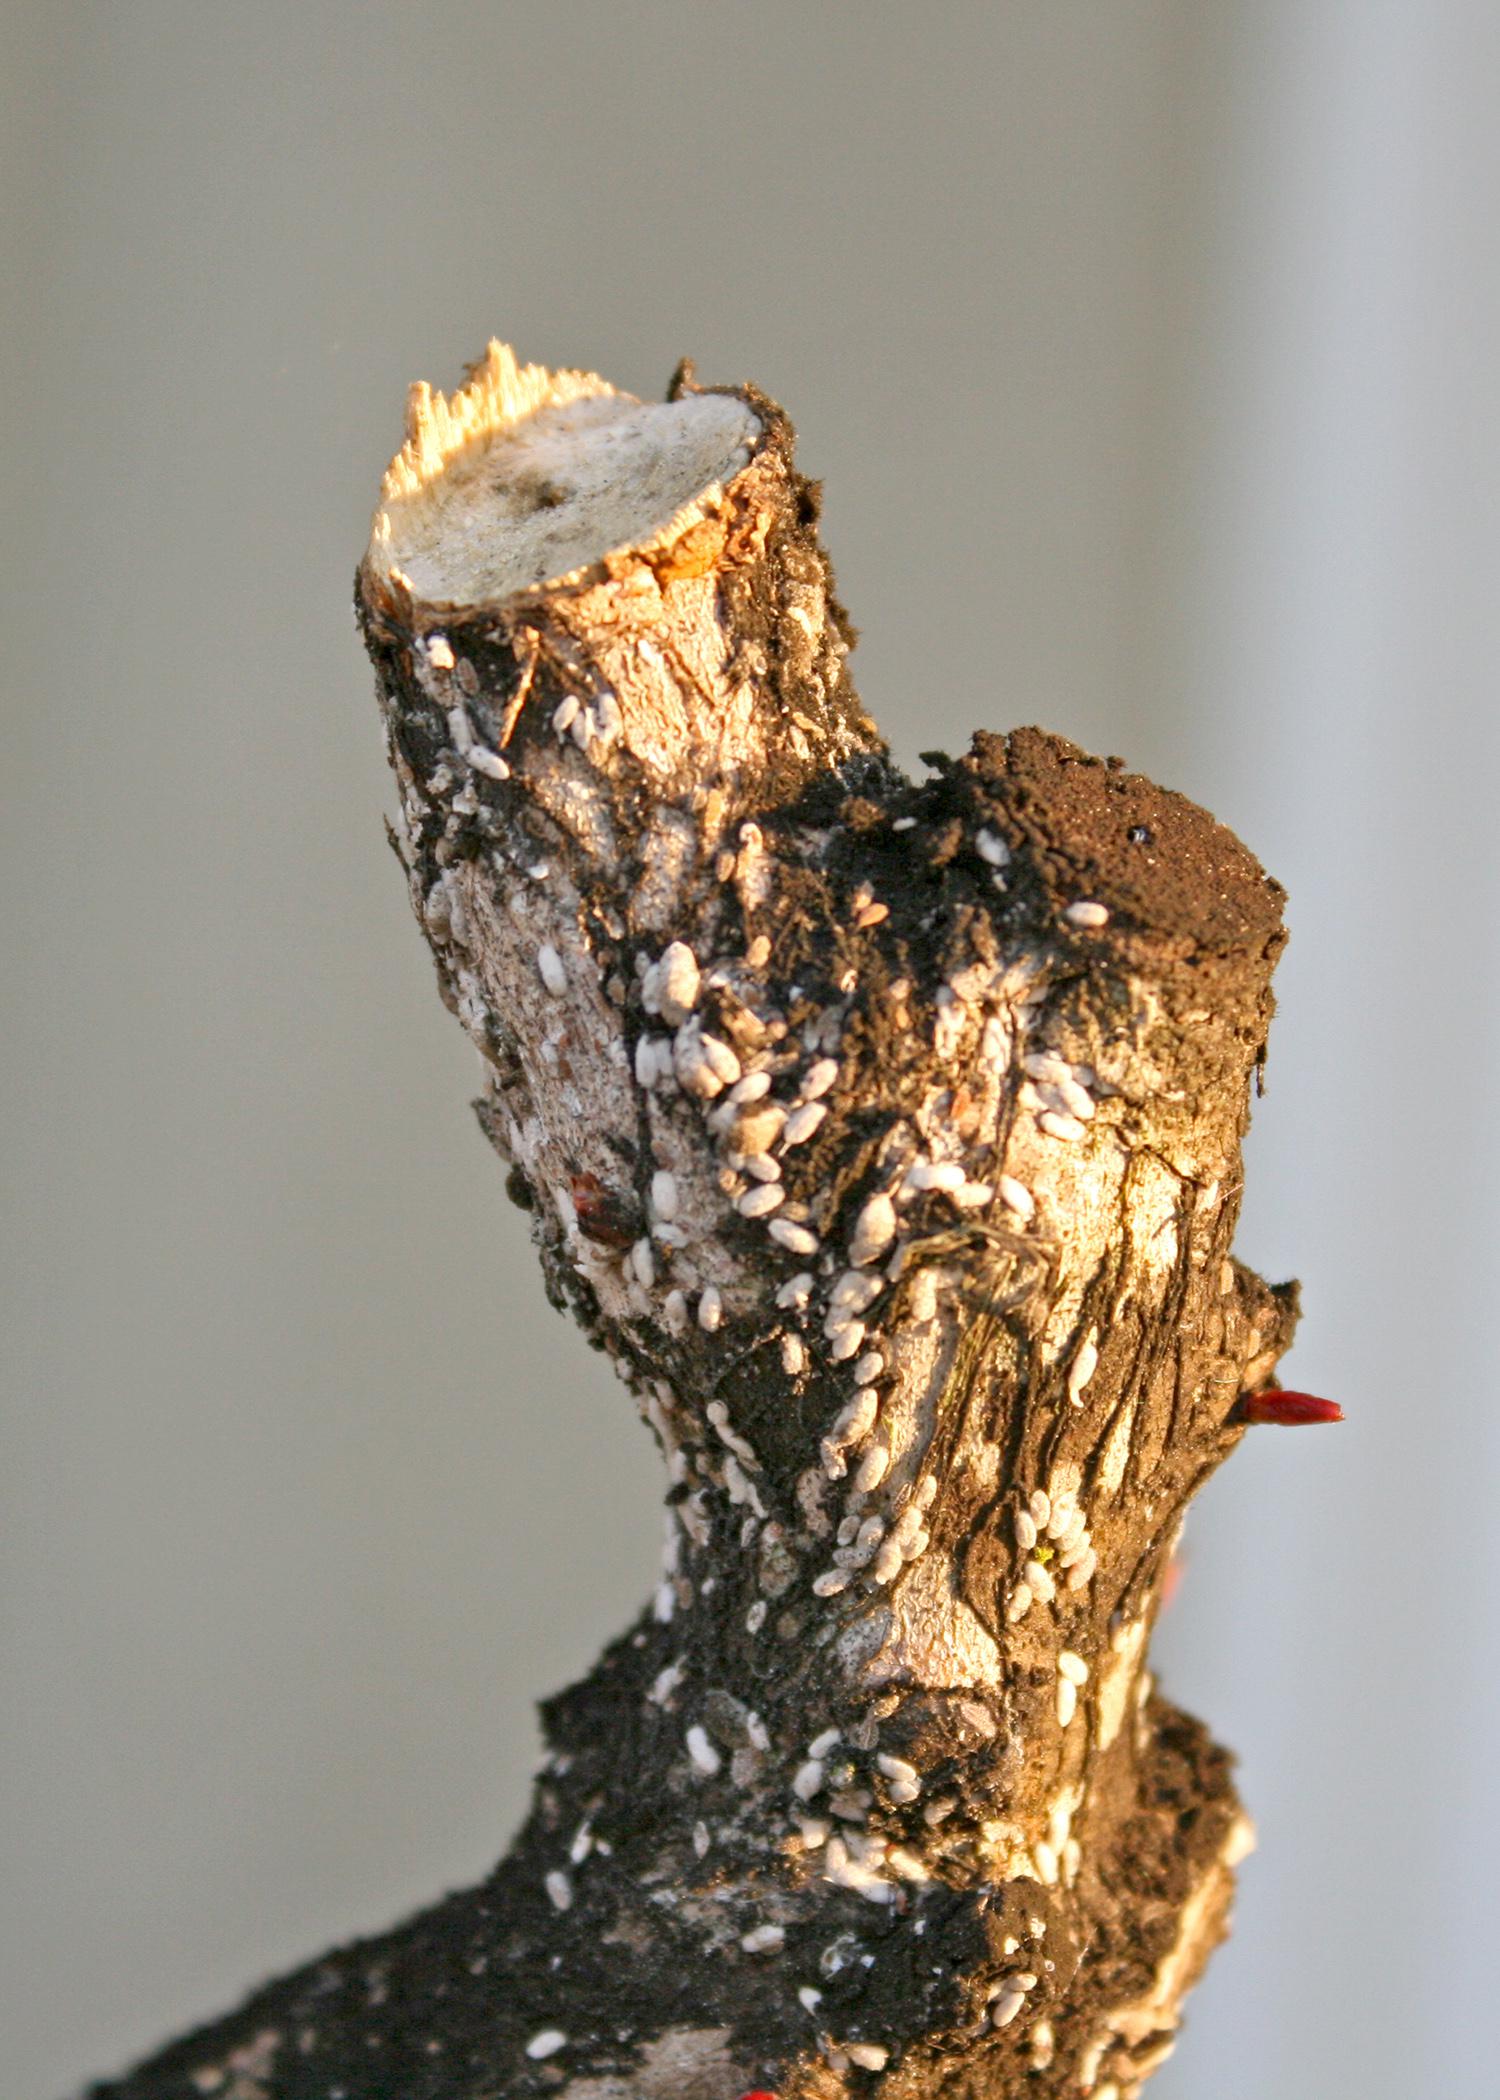 Crape myrtle bark scale were found in Mississippi in March. This invasive insect, photographed in Ocean Springs, Mississippi, on March 15, 2015, attacks beautiful and normally low-maintenance crape myrtles. (Photo by MSU Extension Service/Gary Bachman)